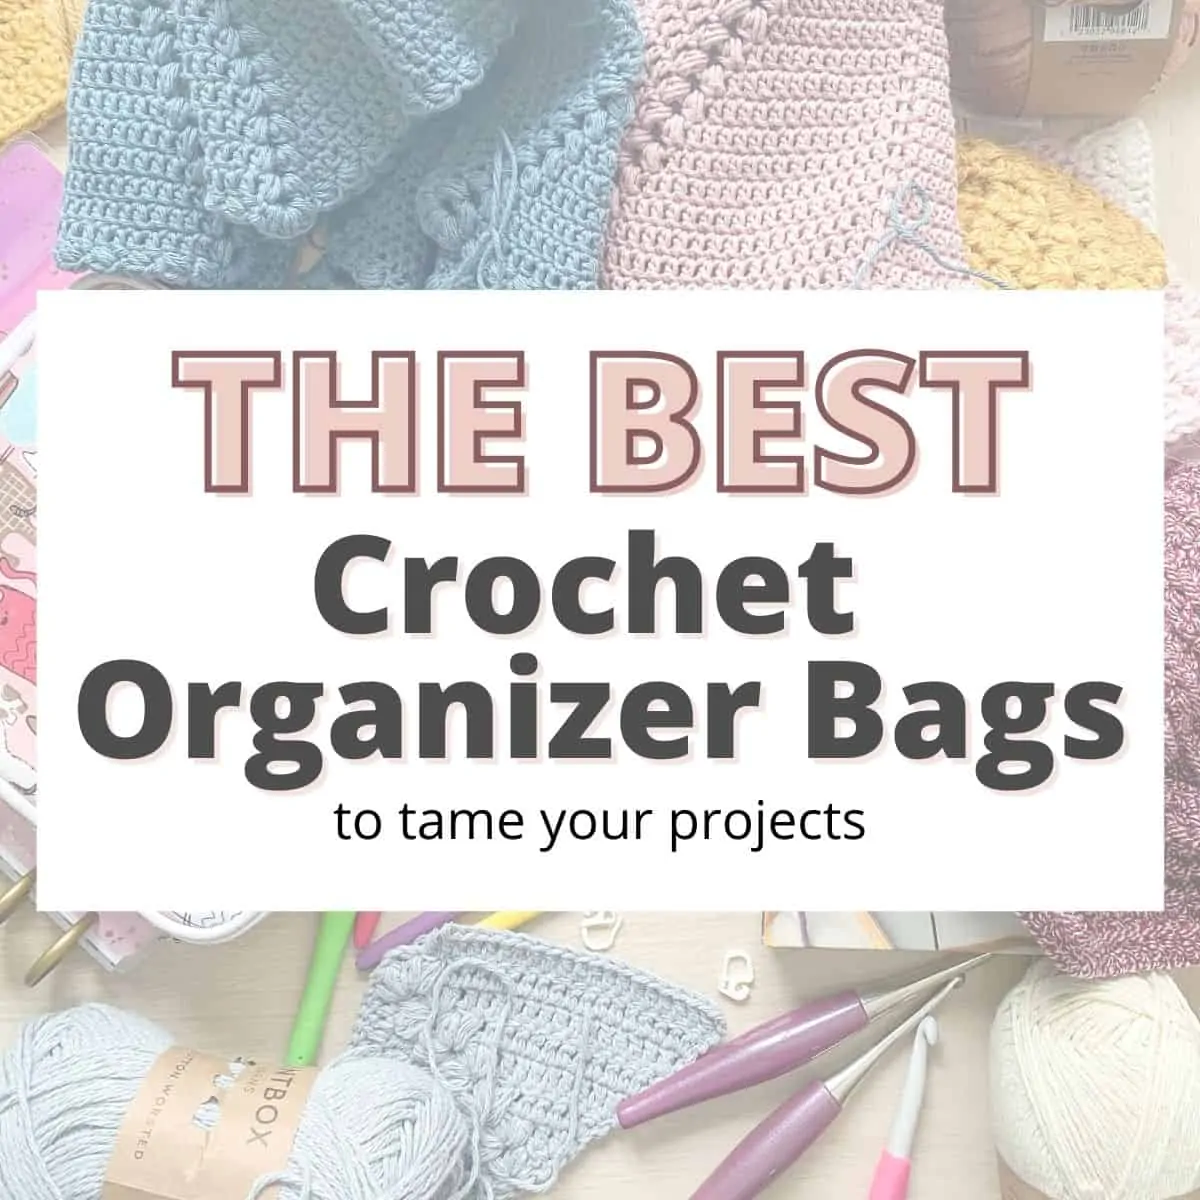 The Best Crochet Project Bags You Need To Organize Your WIPs